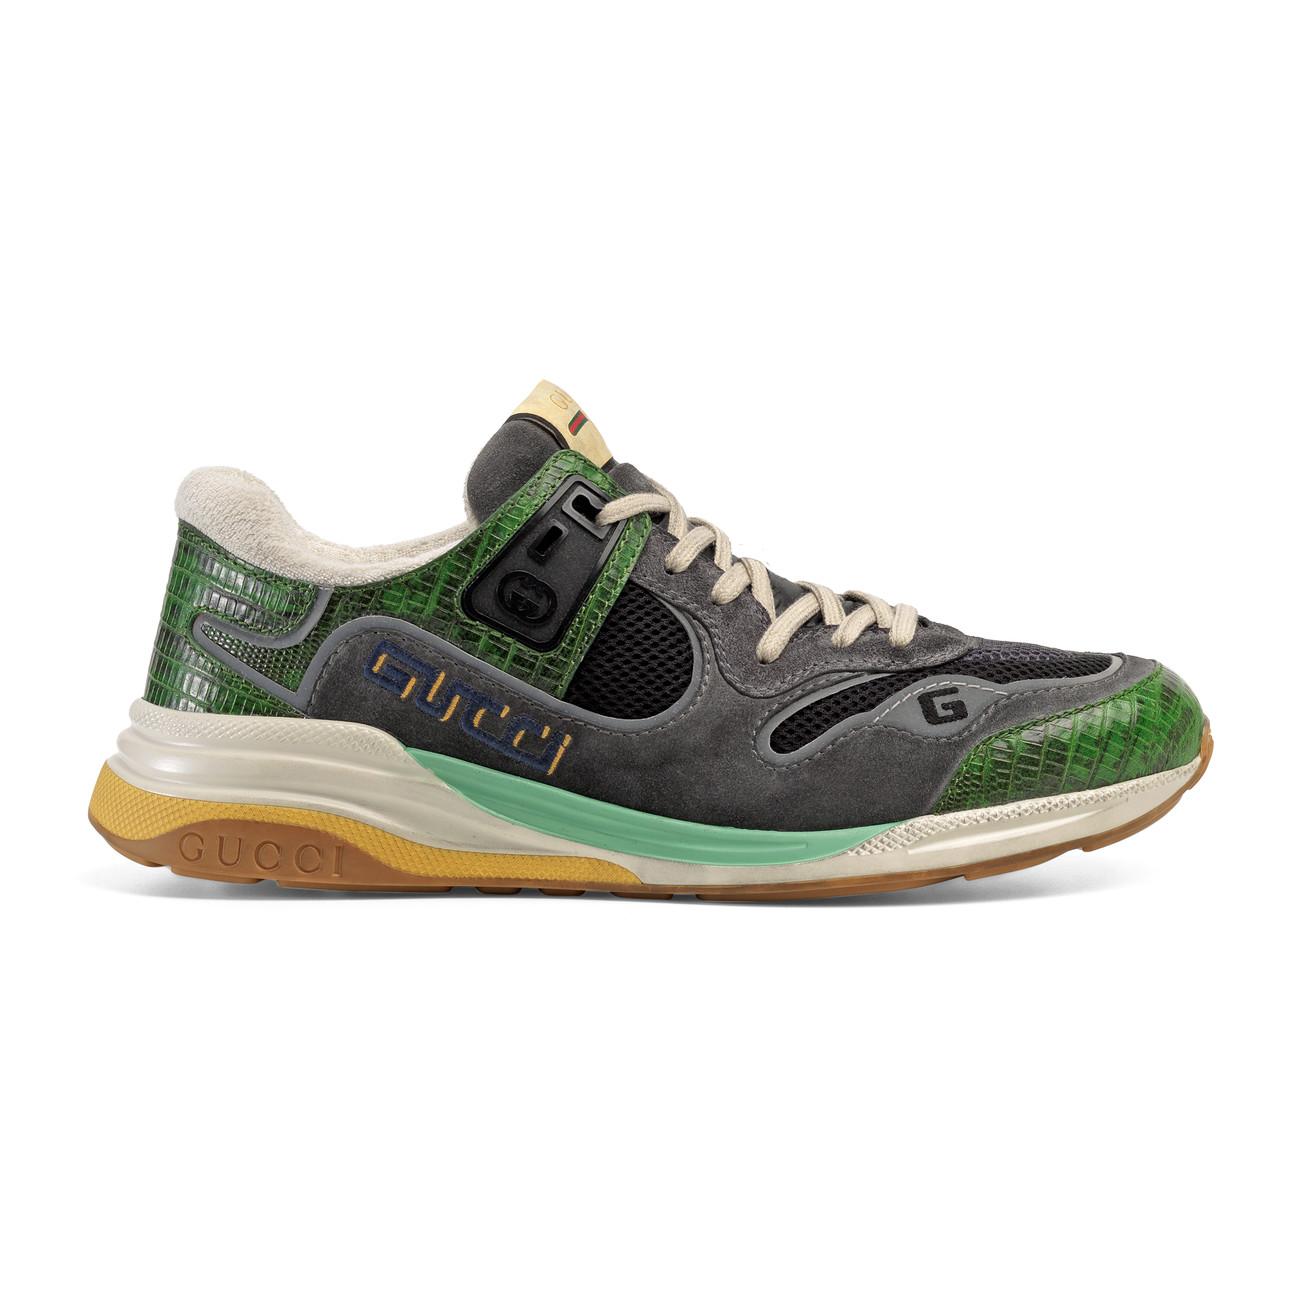 Gucci Leather Ultrapace Sneakers in Green for Men - Lyst